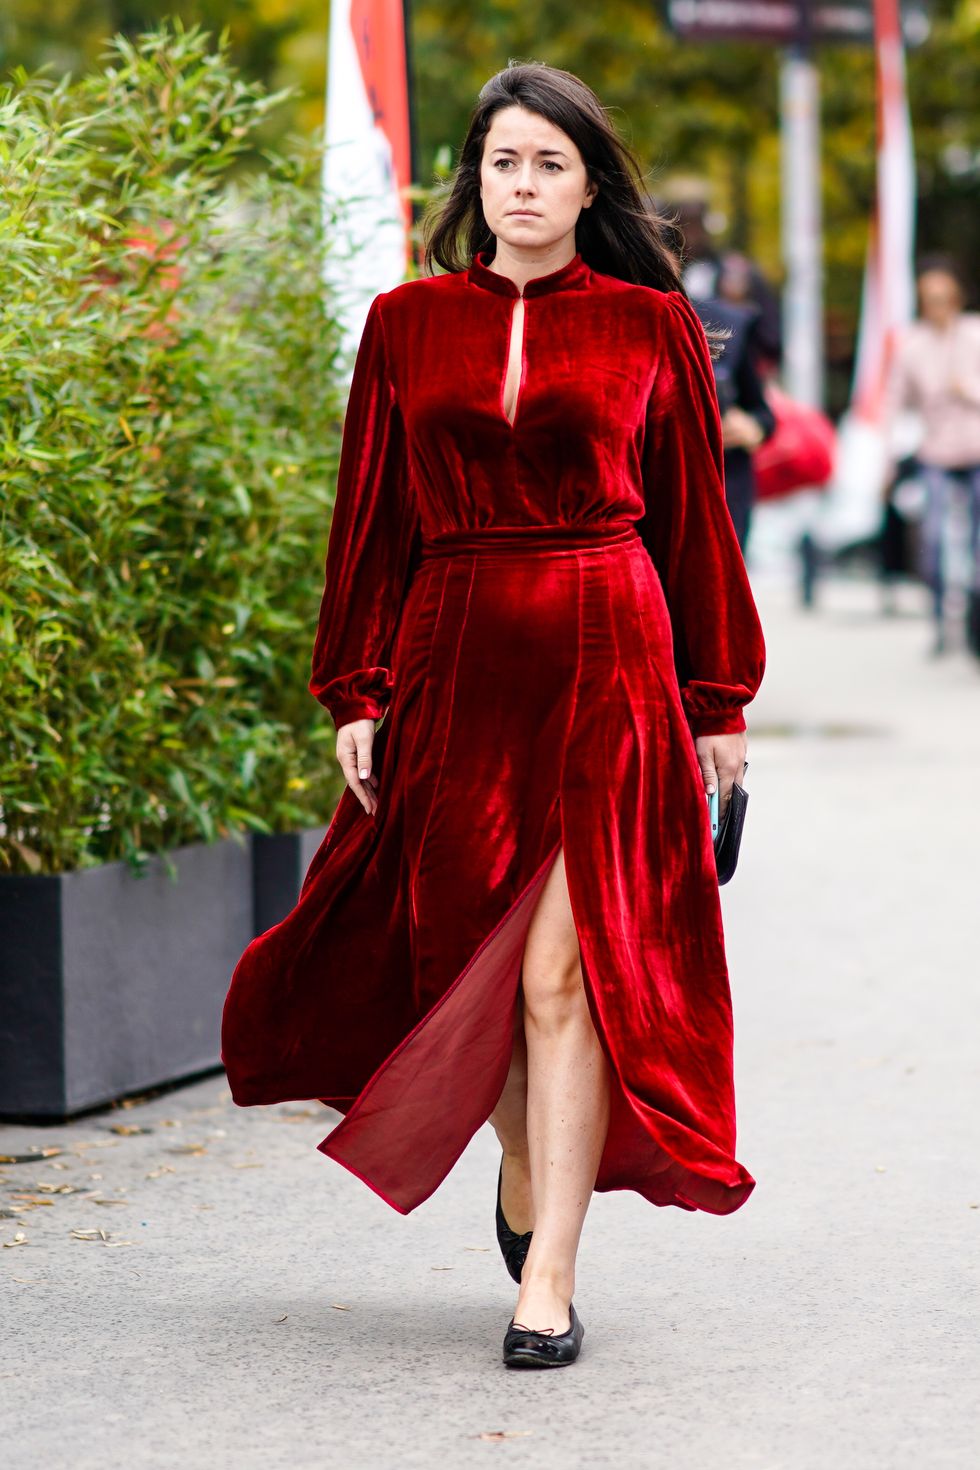 Fashion model, Clothing, Red, Fashion, Street fashion, Outerwear, Dress, Haute couture, Maroon, Runway, 